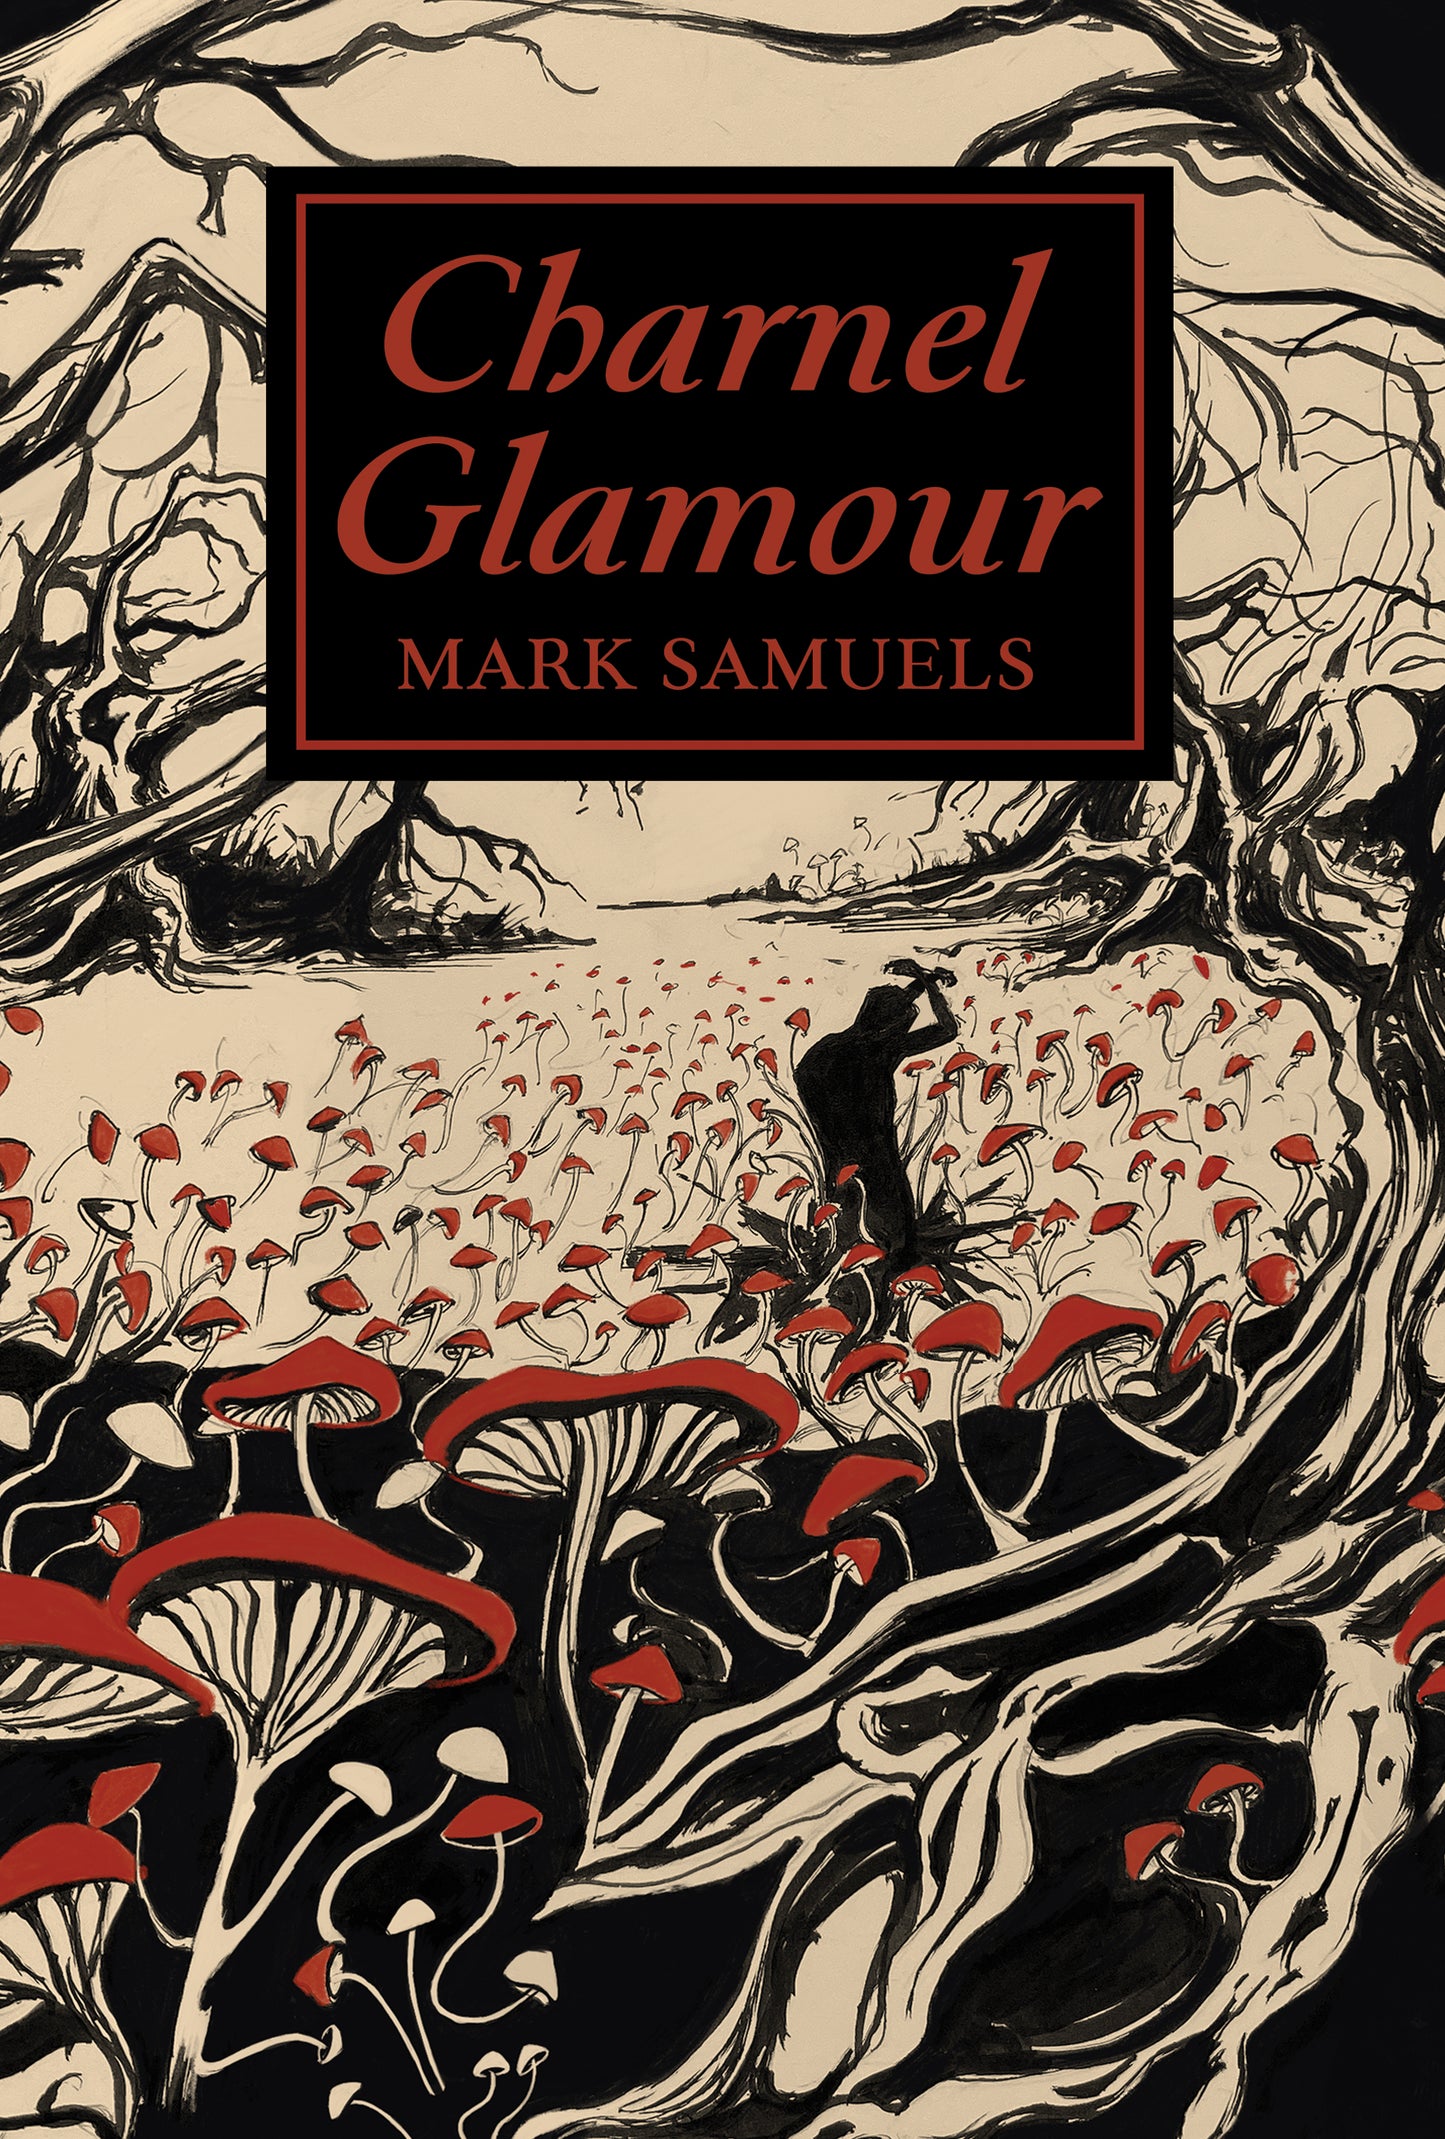 Charnel Glamour by Mark Samuels